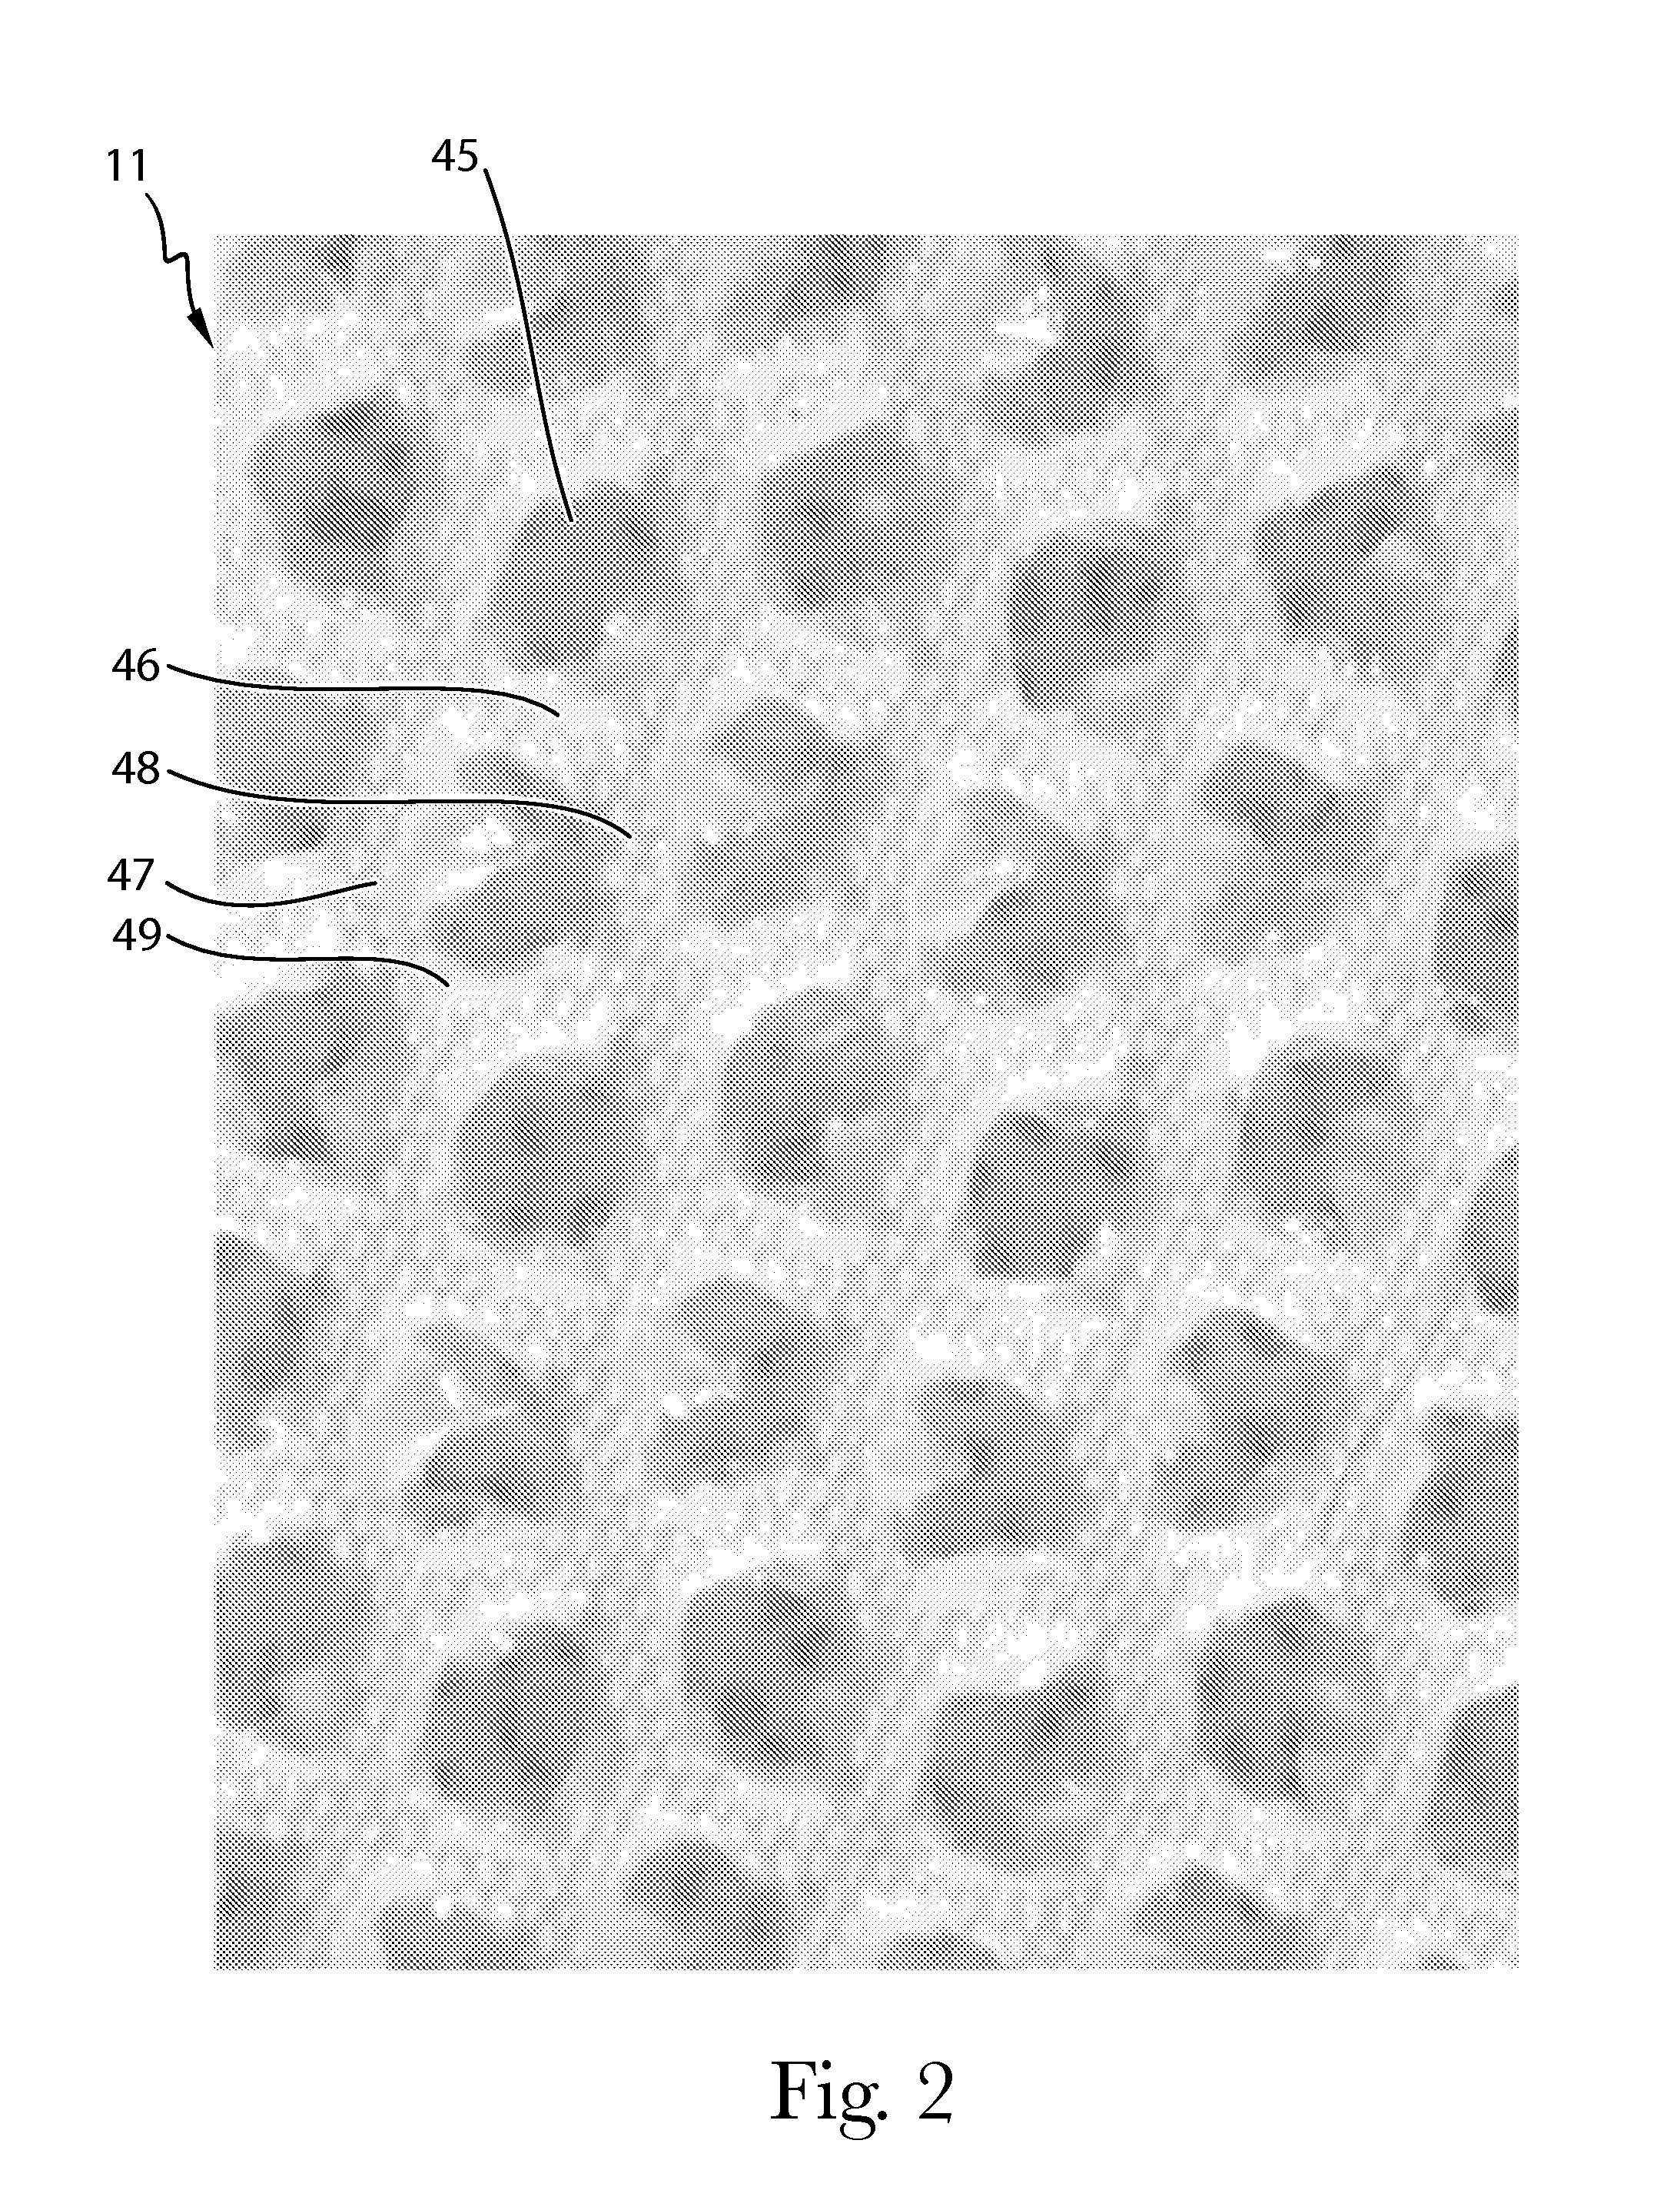 Absorbent Article Having Surface Visual Texture